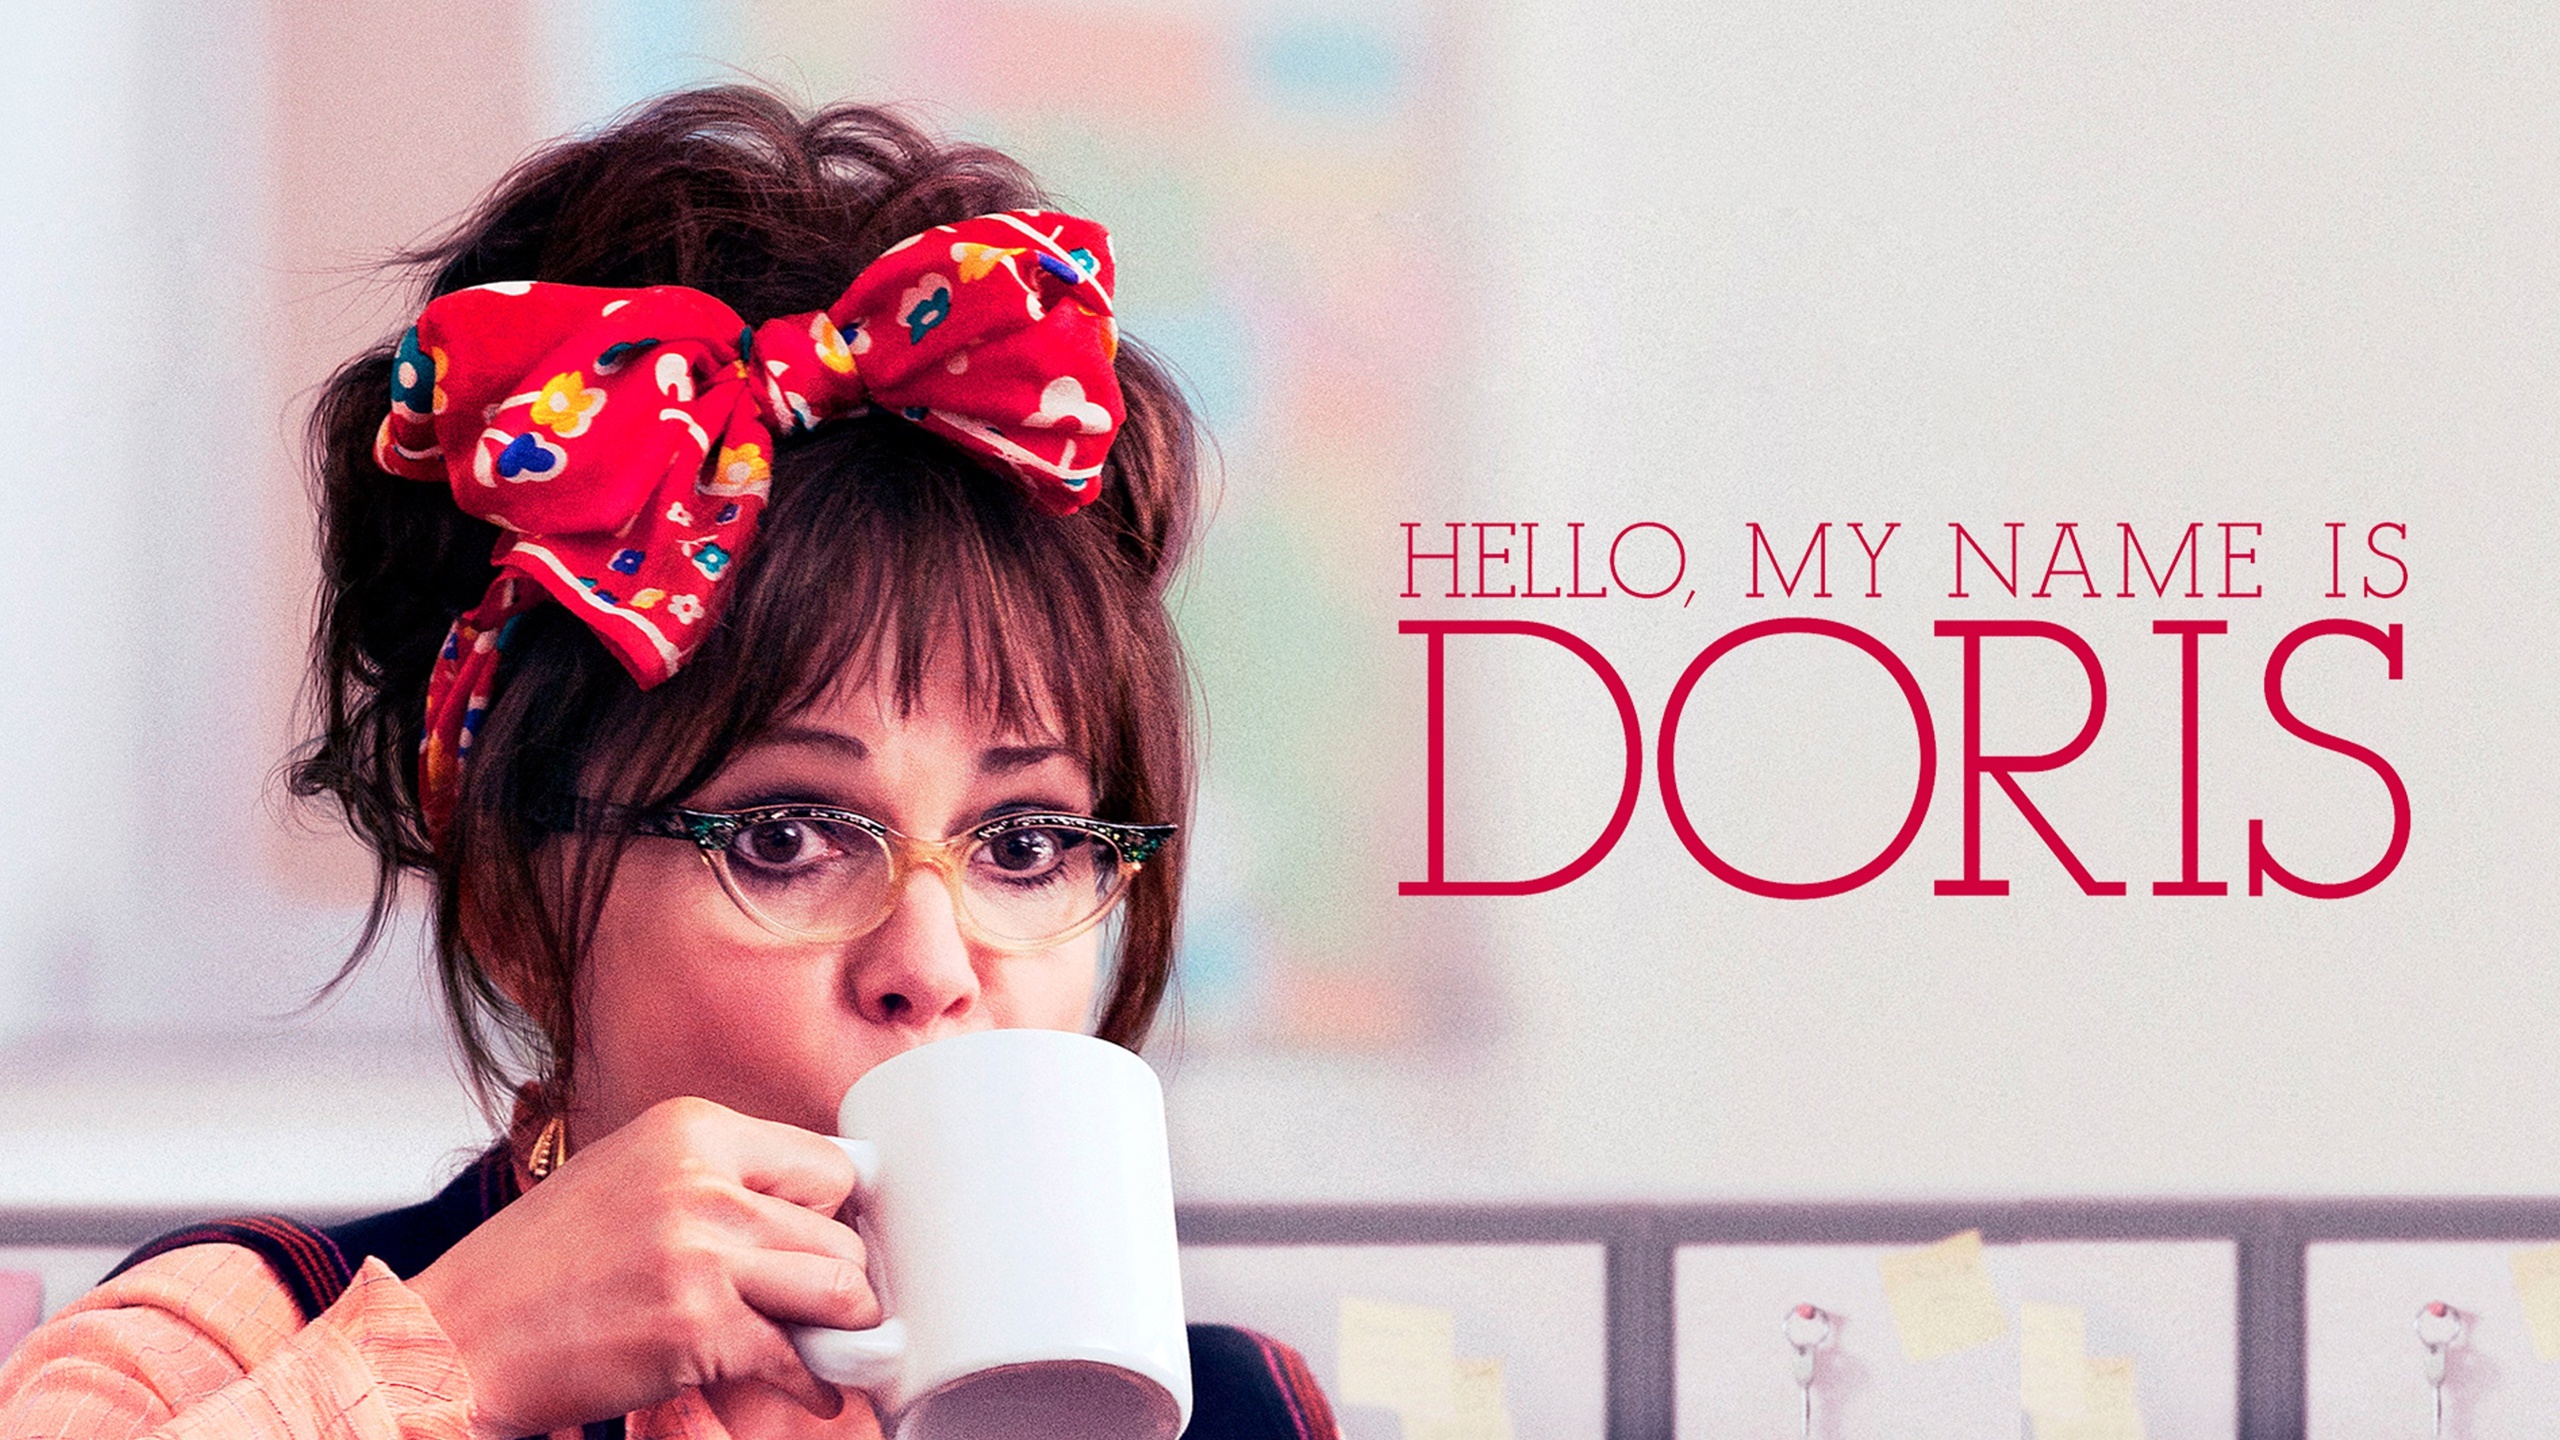 Hello, My Name Is Doris, Online free trial, Roku channel, Specialty preview, 2560x1440 HD Desktop